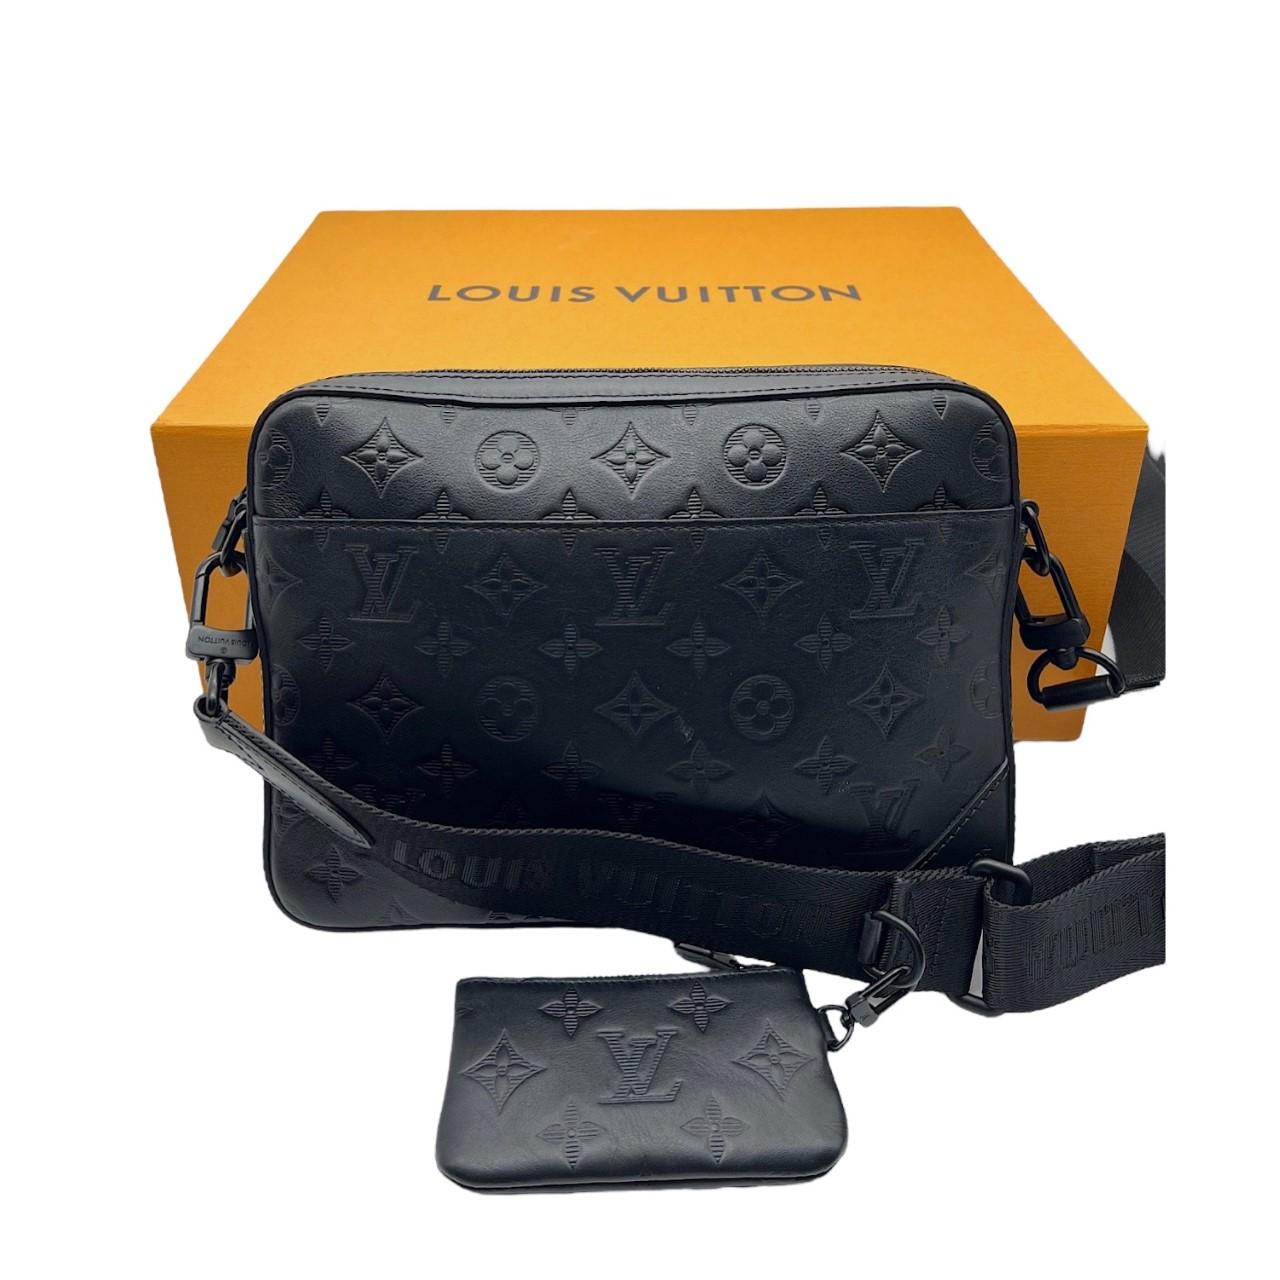 We are offering this Louis Vuitton Black Duo Messenger. With its sleek appearance, this messenger bag is crafted of Louis Vuitton Monogram Shadow leather with cowhide leather trims and matte black hardware. It features a Louis Vuitton textile